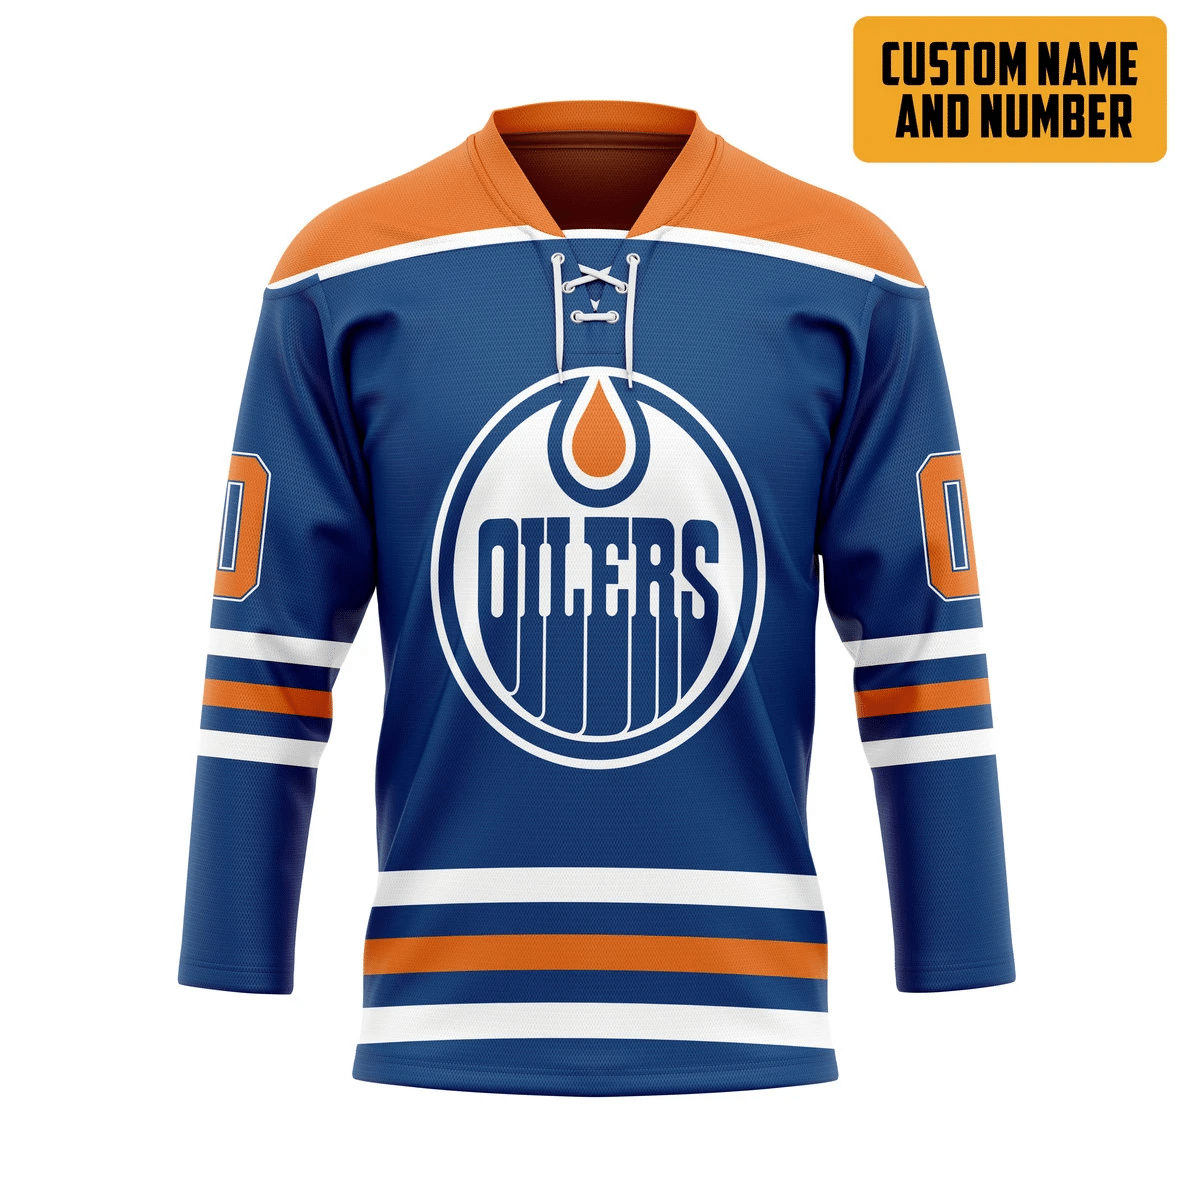 Choosing a hockey jersey is not as difficult as you think. 96